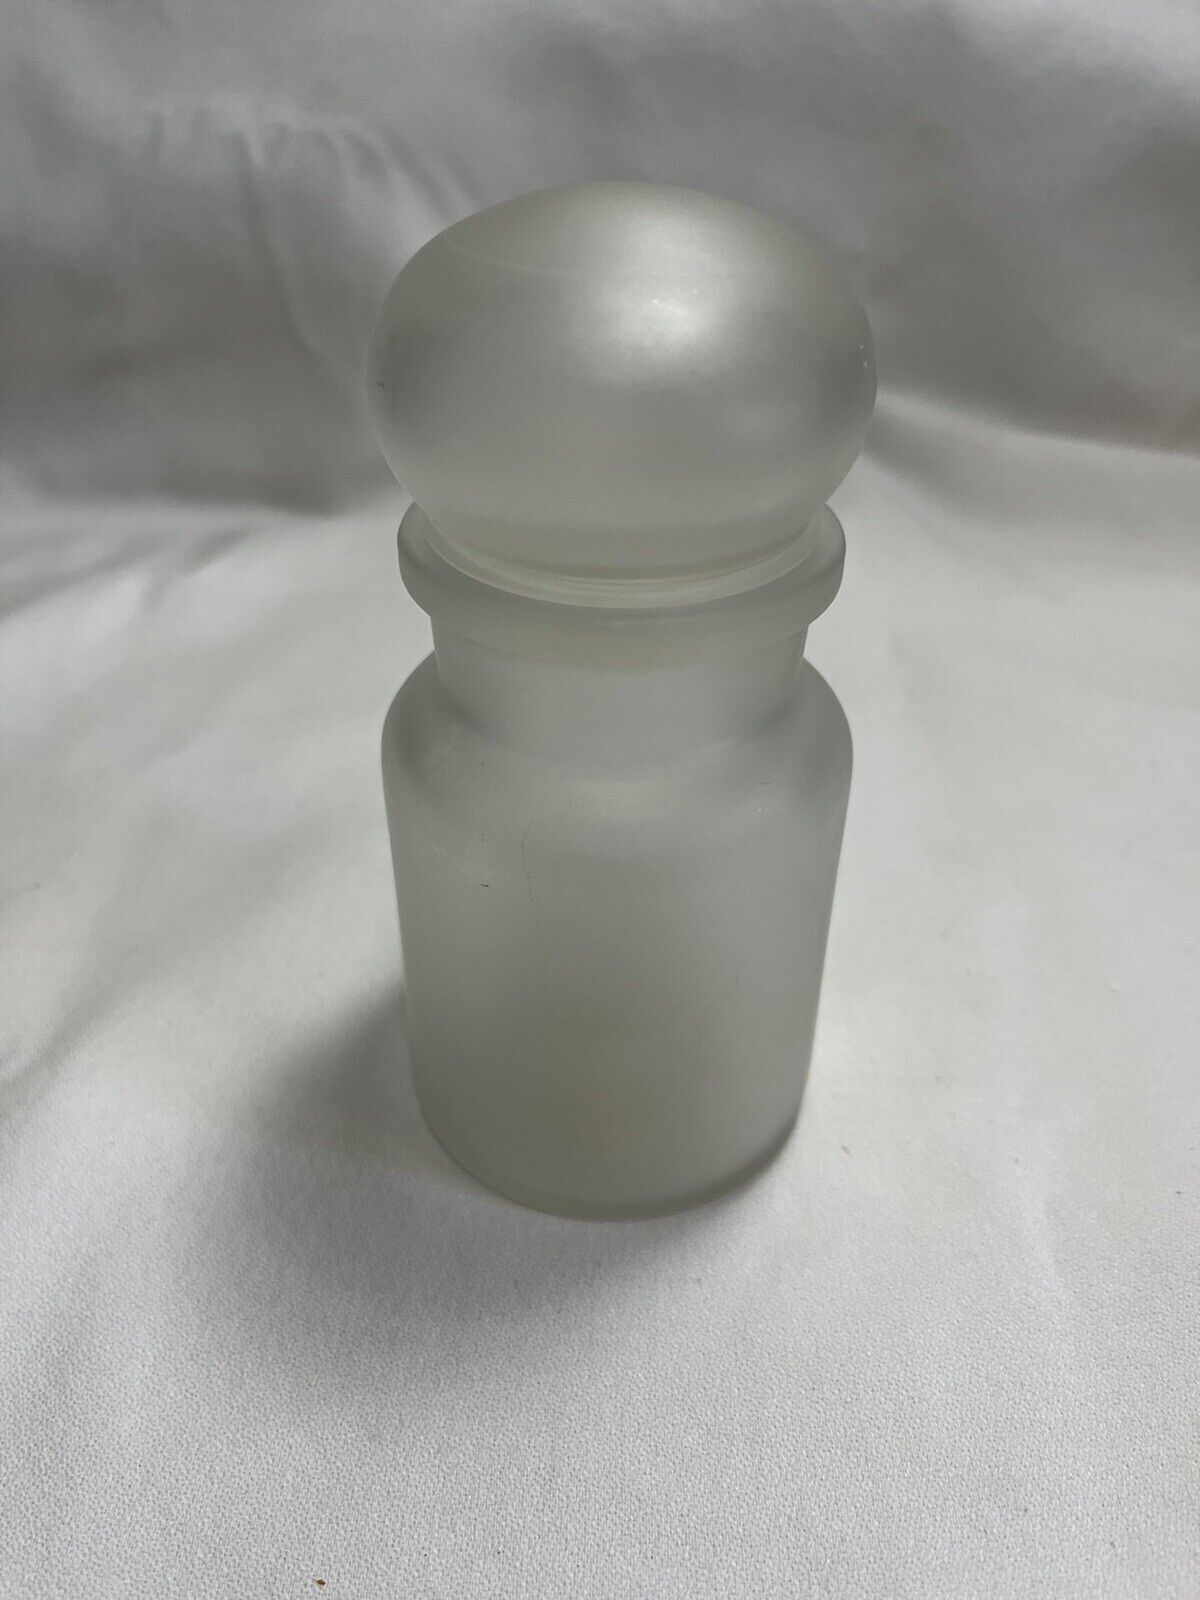 Very Rare Estee Lauder ‘Perfumed Milk Bath’ Frosted Glass Jar With Lid 7oz.